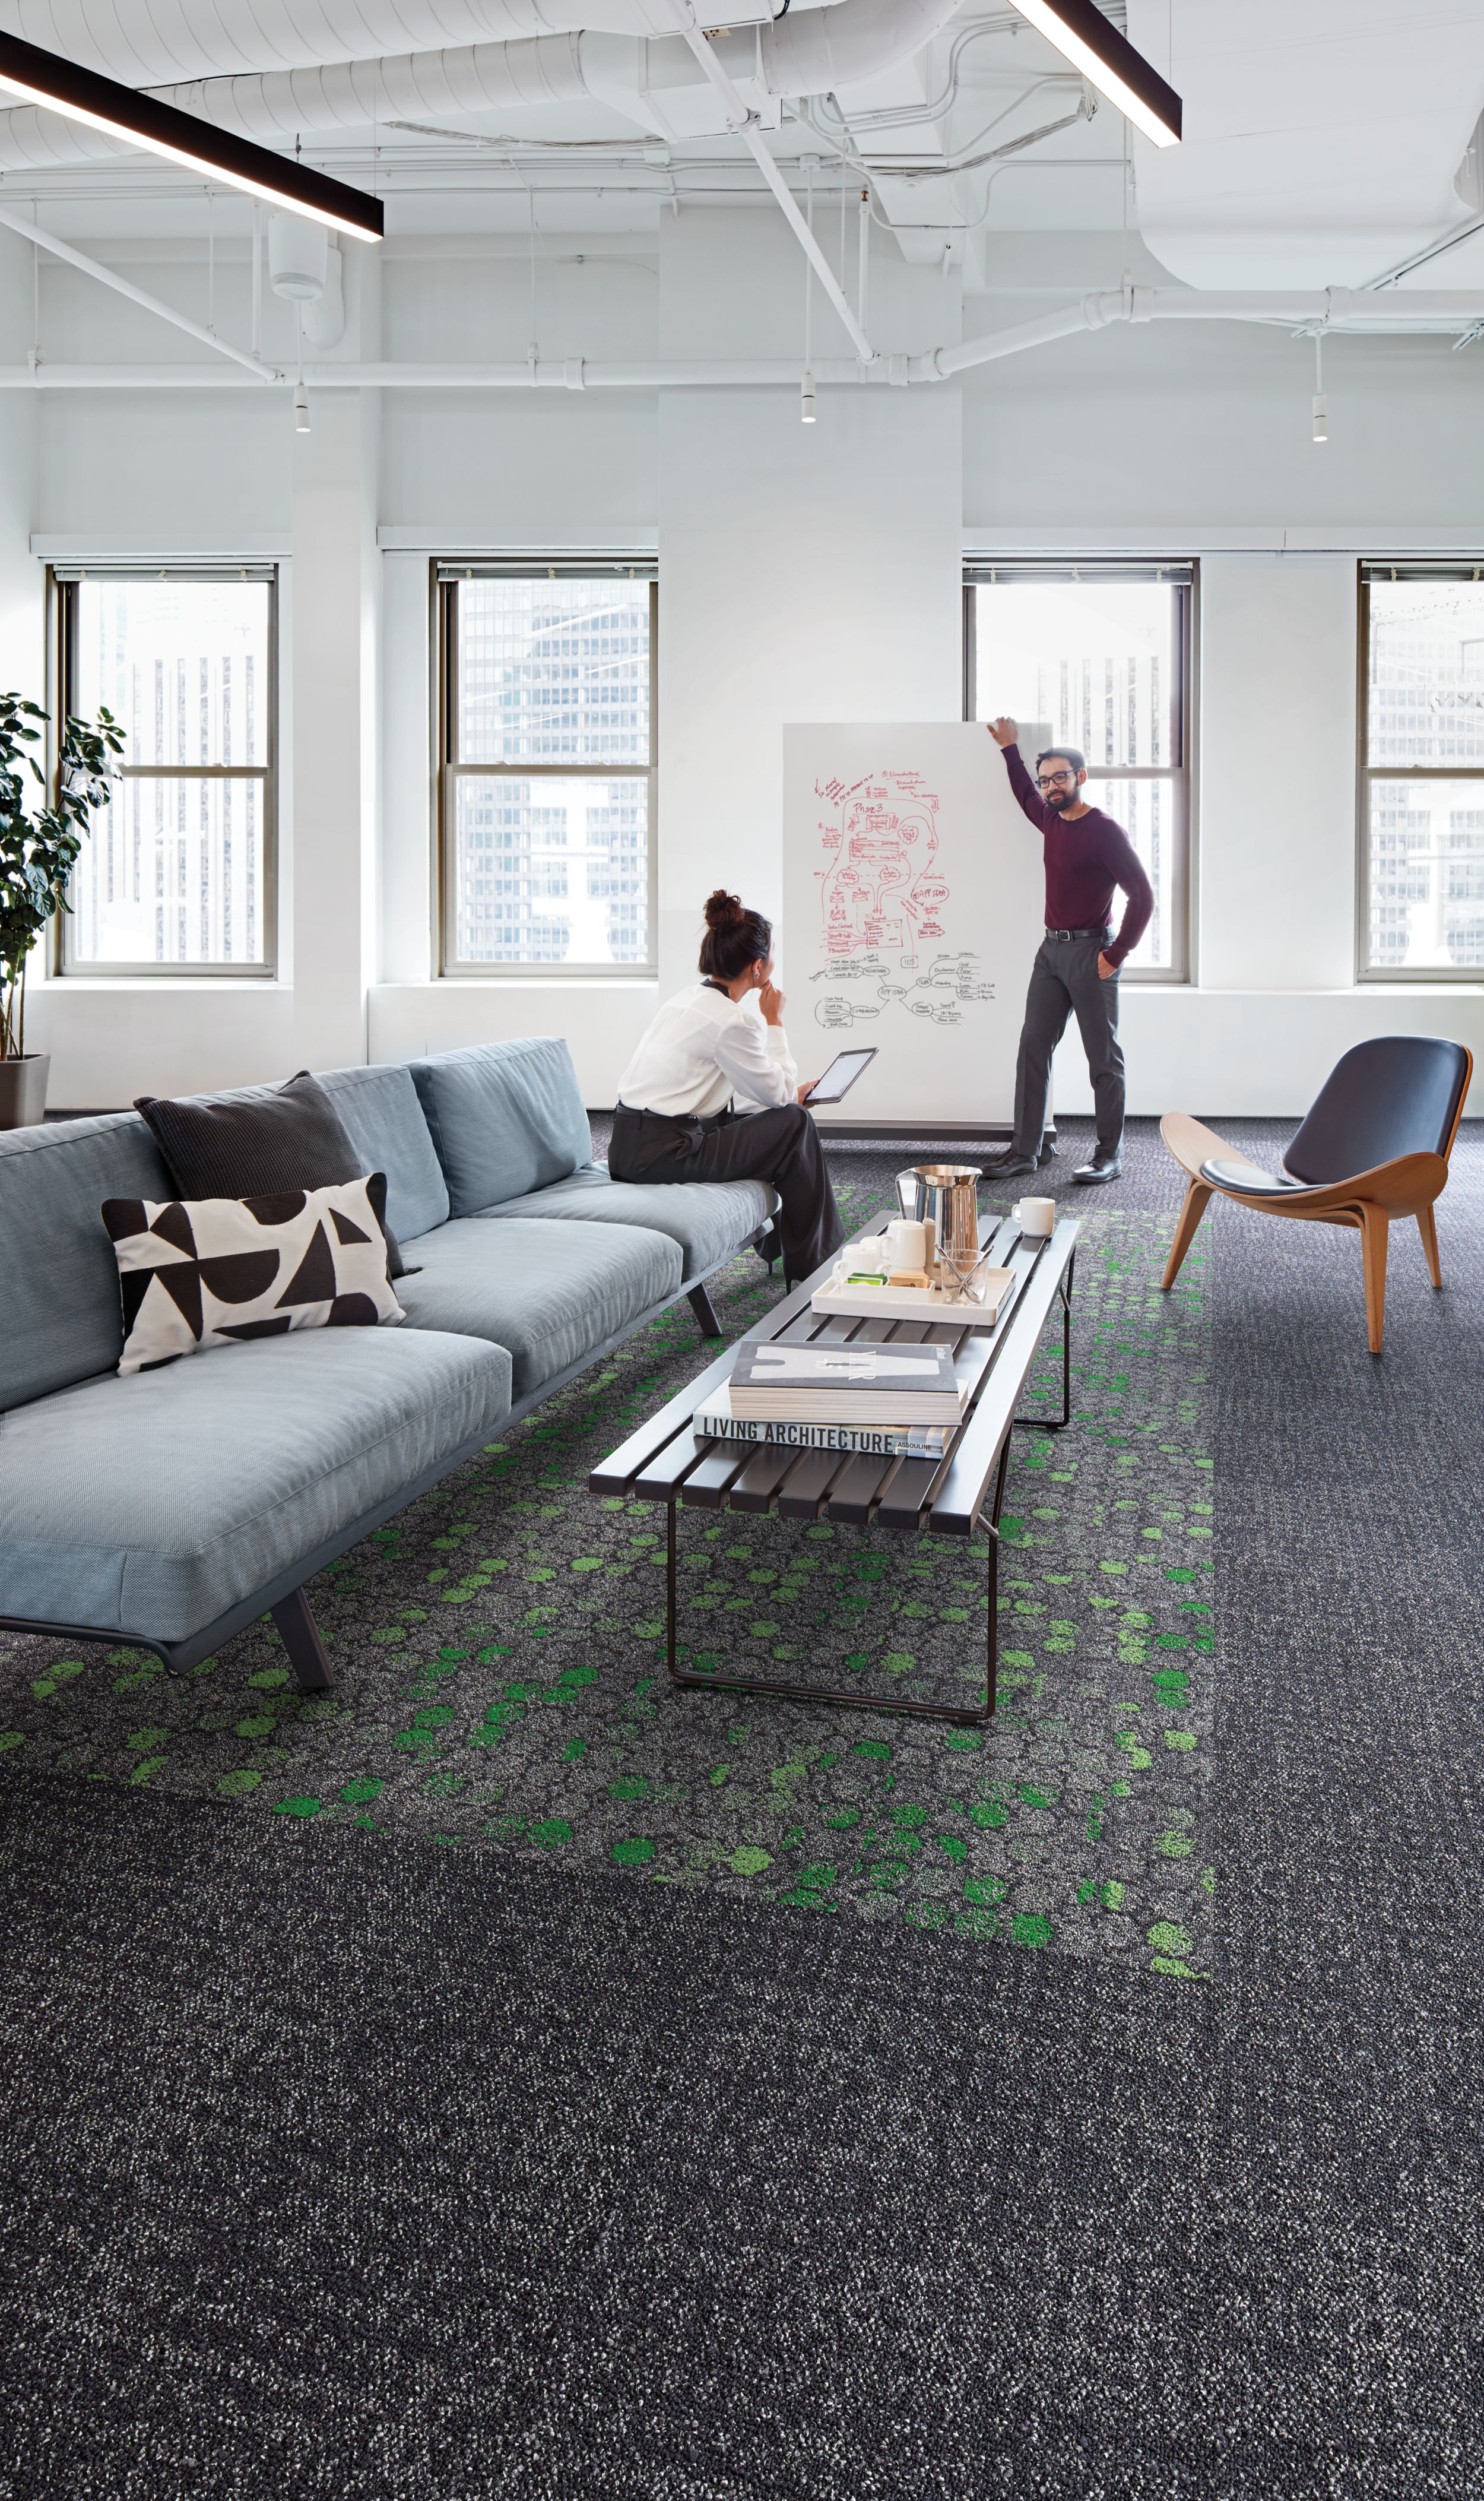 Interface Broome Street and Wheler Street in open office area with people Bildnummer 10